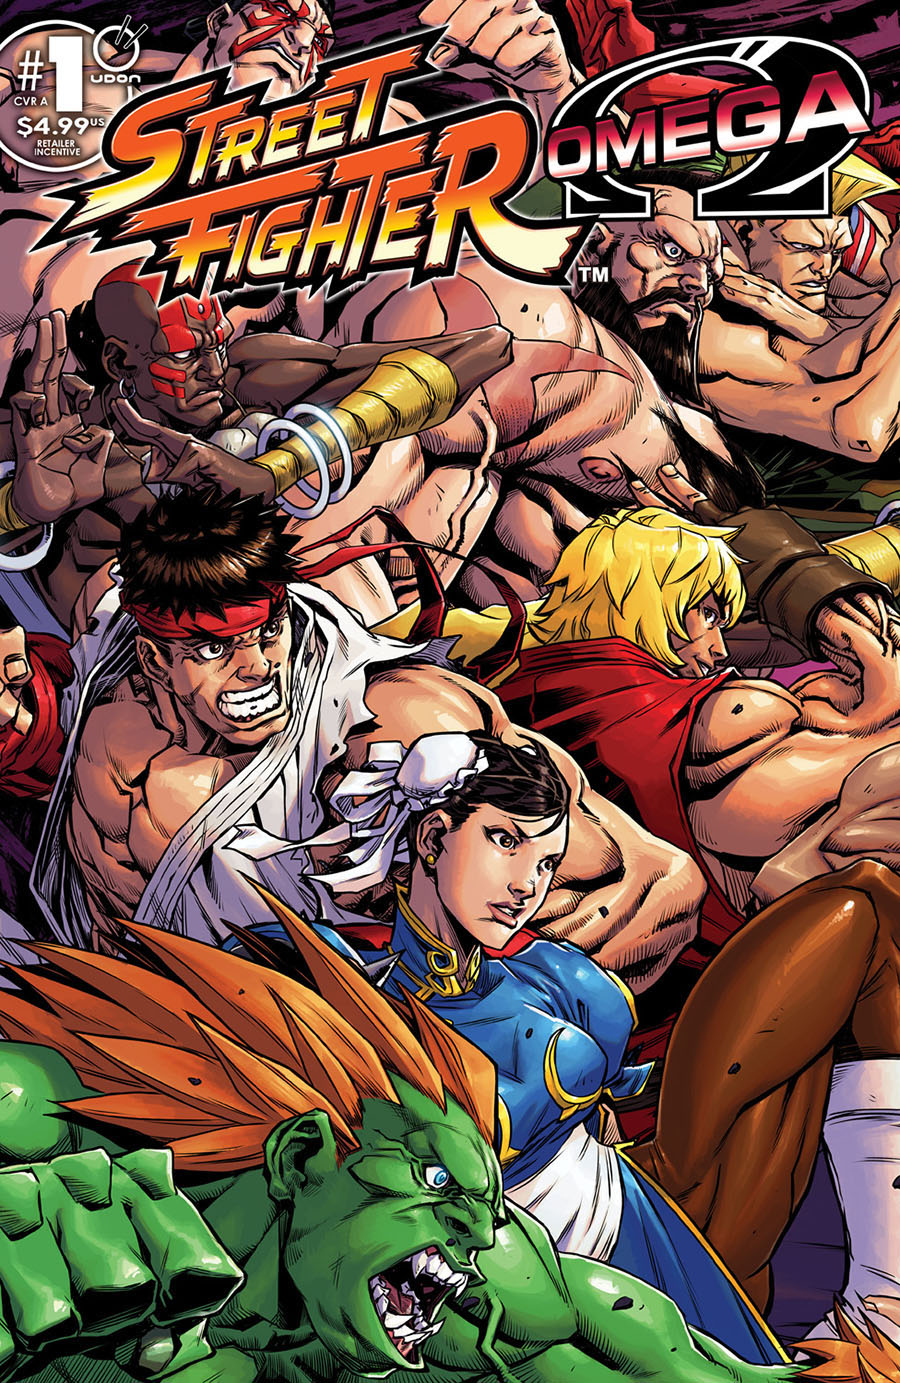 Street Fighter Omega #1 (One Shot) Cover A Regular Joe Ng Connecting Left Side Cover